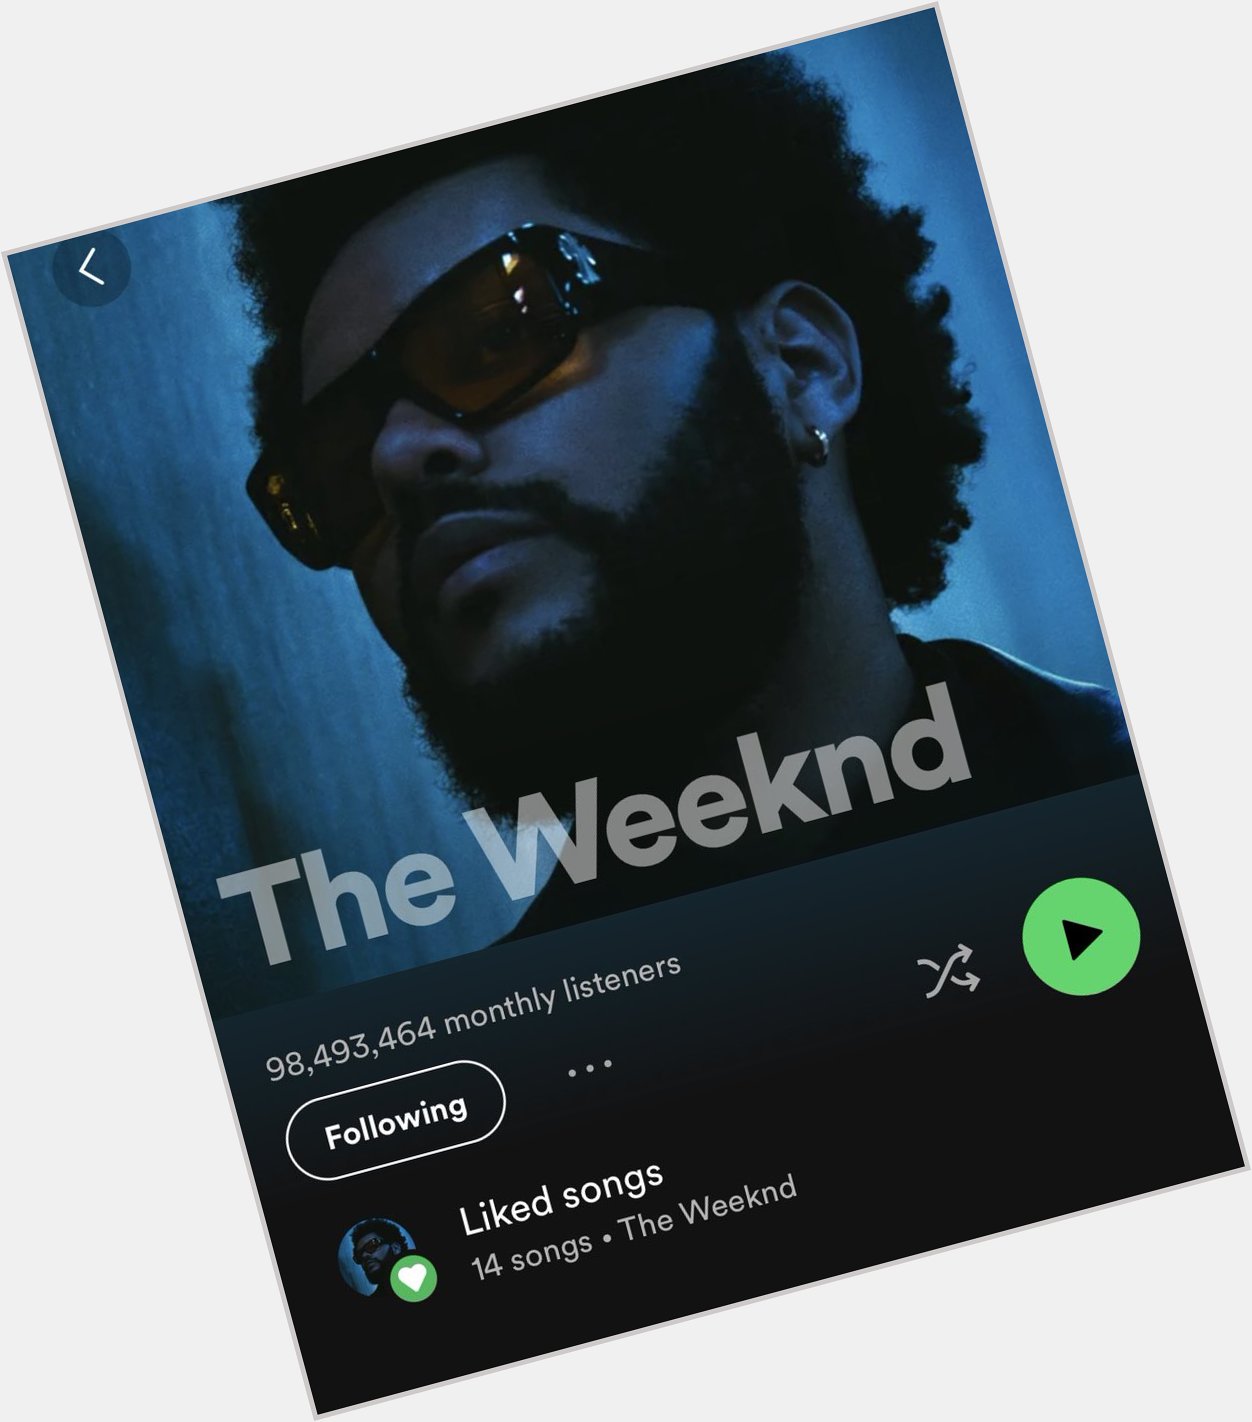 Happy birthday to the weeknd but also holy shit hes gonna hit 100 mil soon 